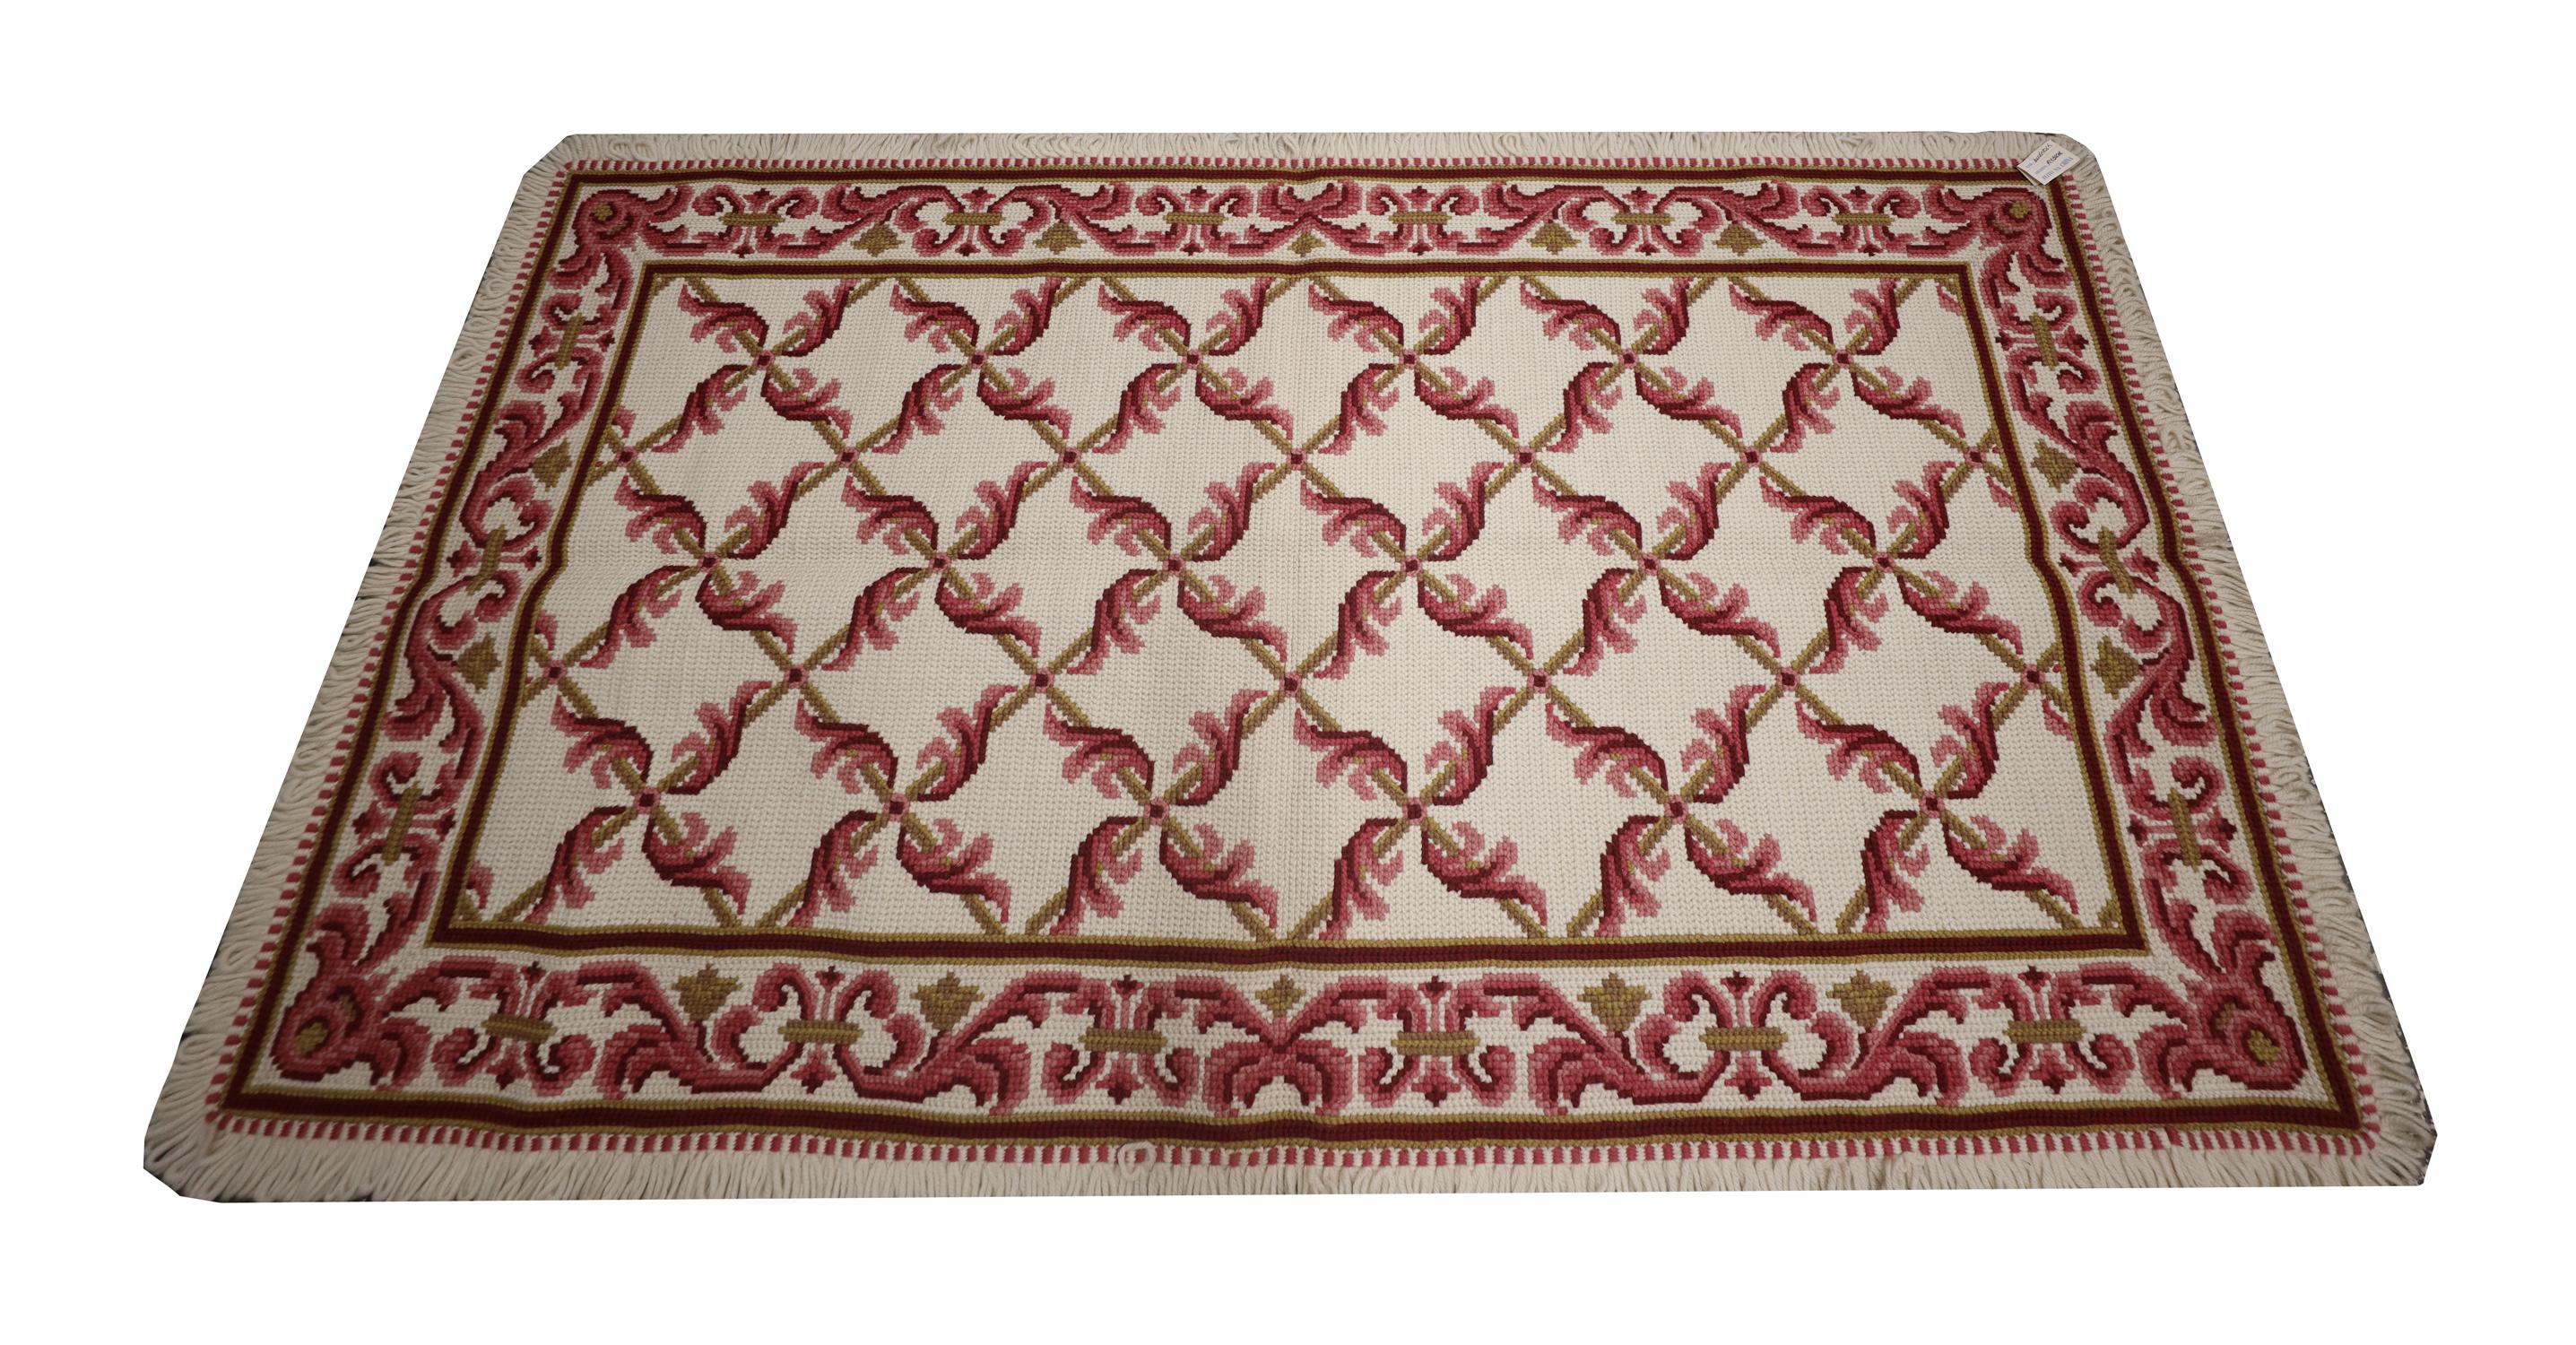 Are you looking for a new carpet to enhance your living room or bedroom? This Beautiful rug could make the perfect accessory. This elegant wool needlepoint is a classic example of a modern Portuguese style rug woven by hand in China in the early